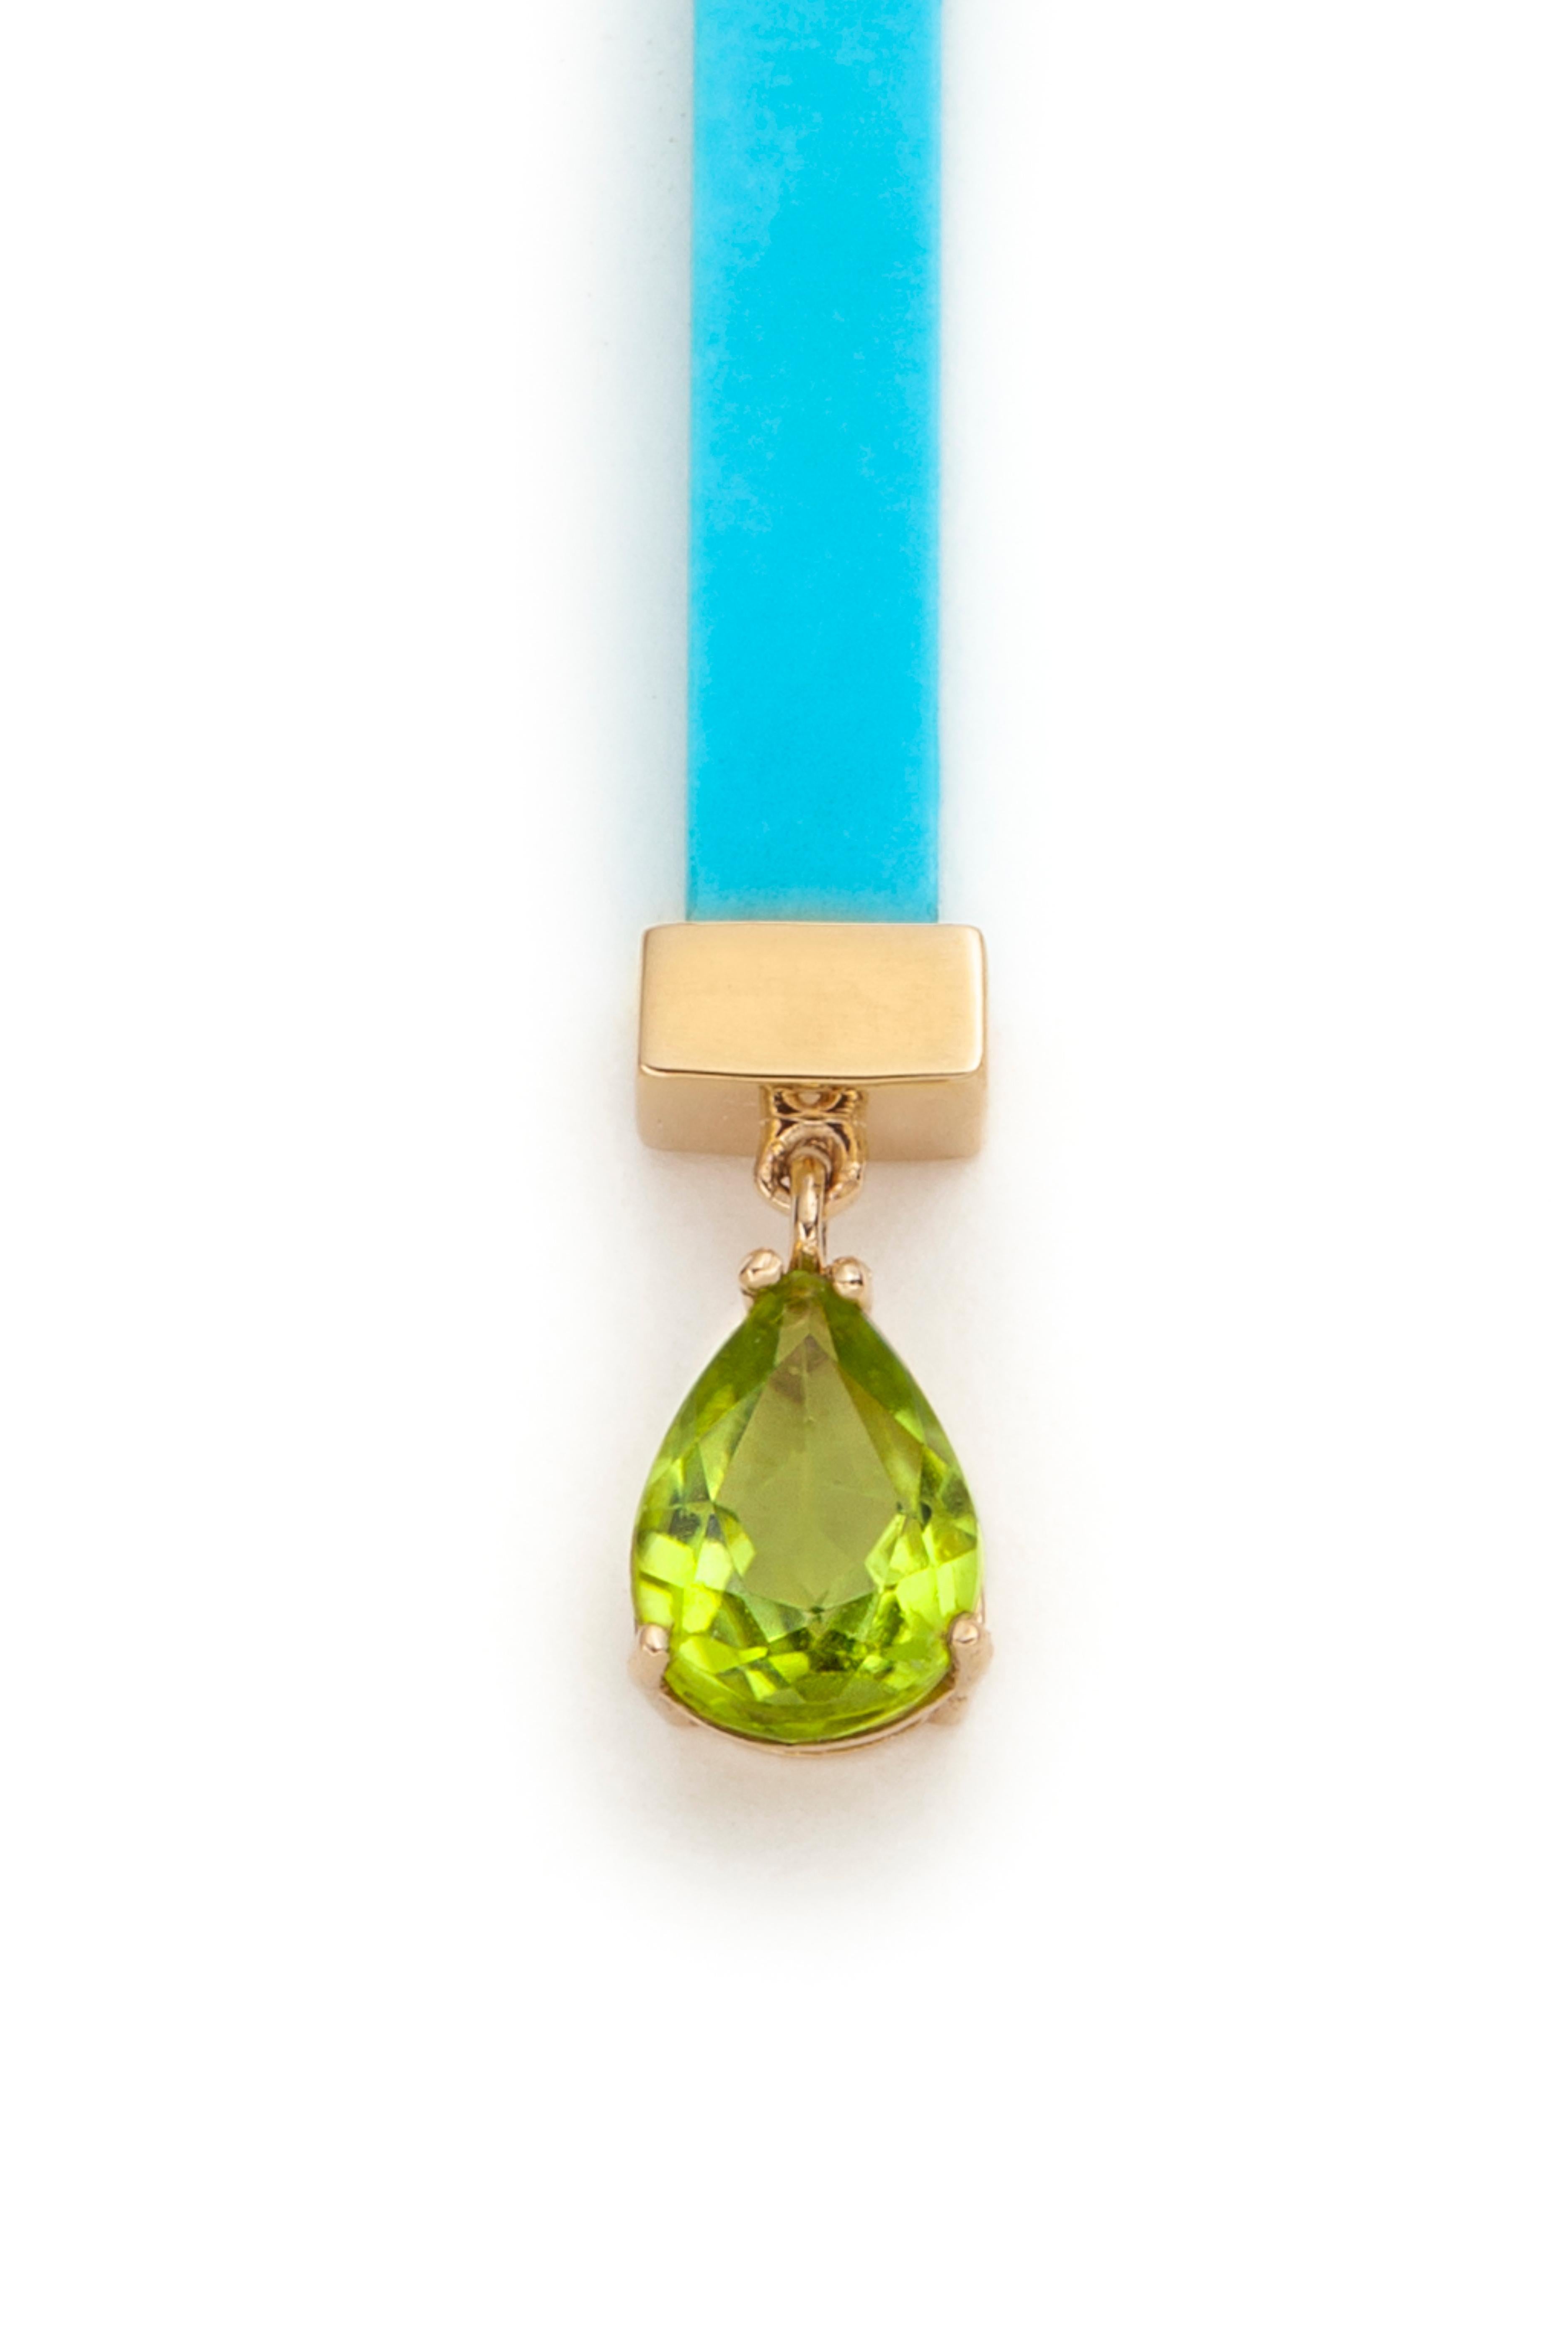 Contemporary Turquoise and Peridot Earrings in 14K yellow Gold, by SERAFINO For Sale